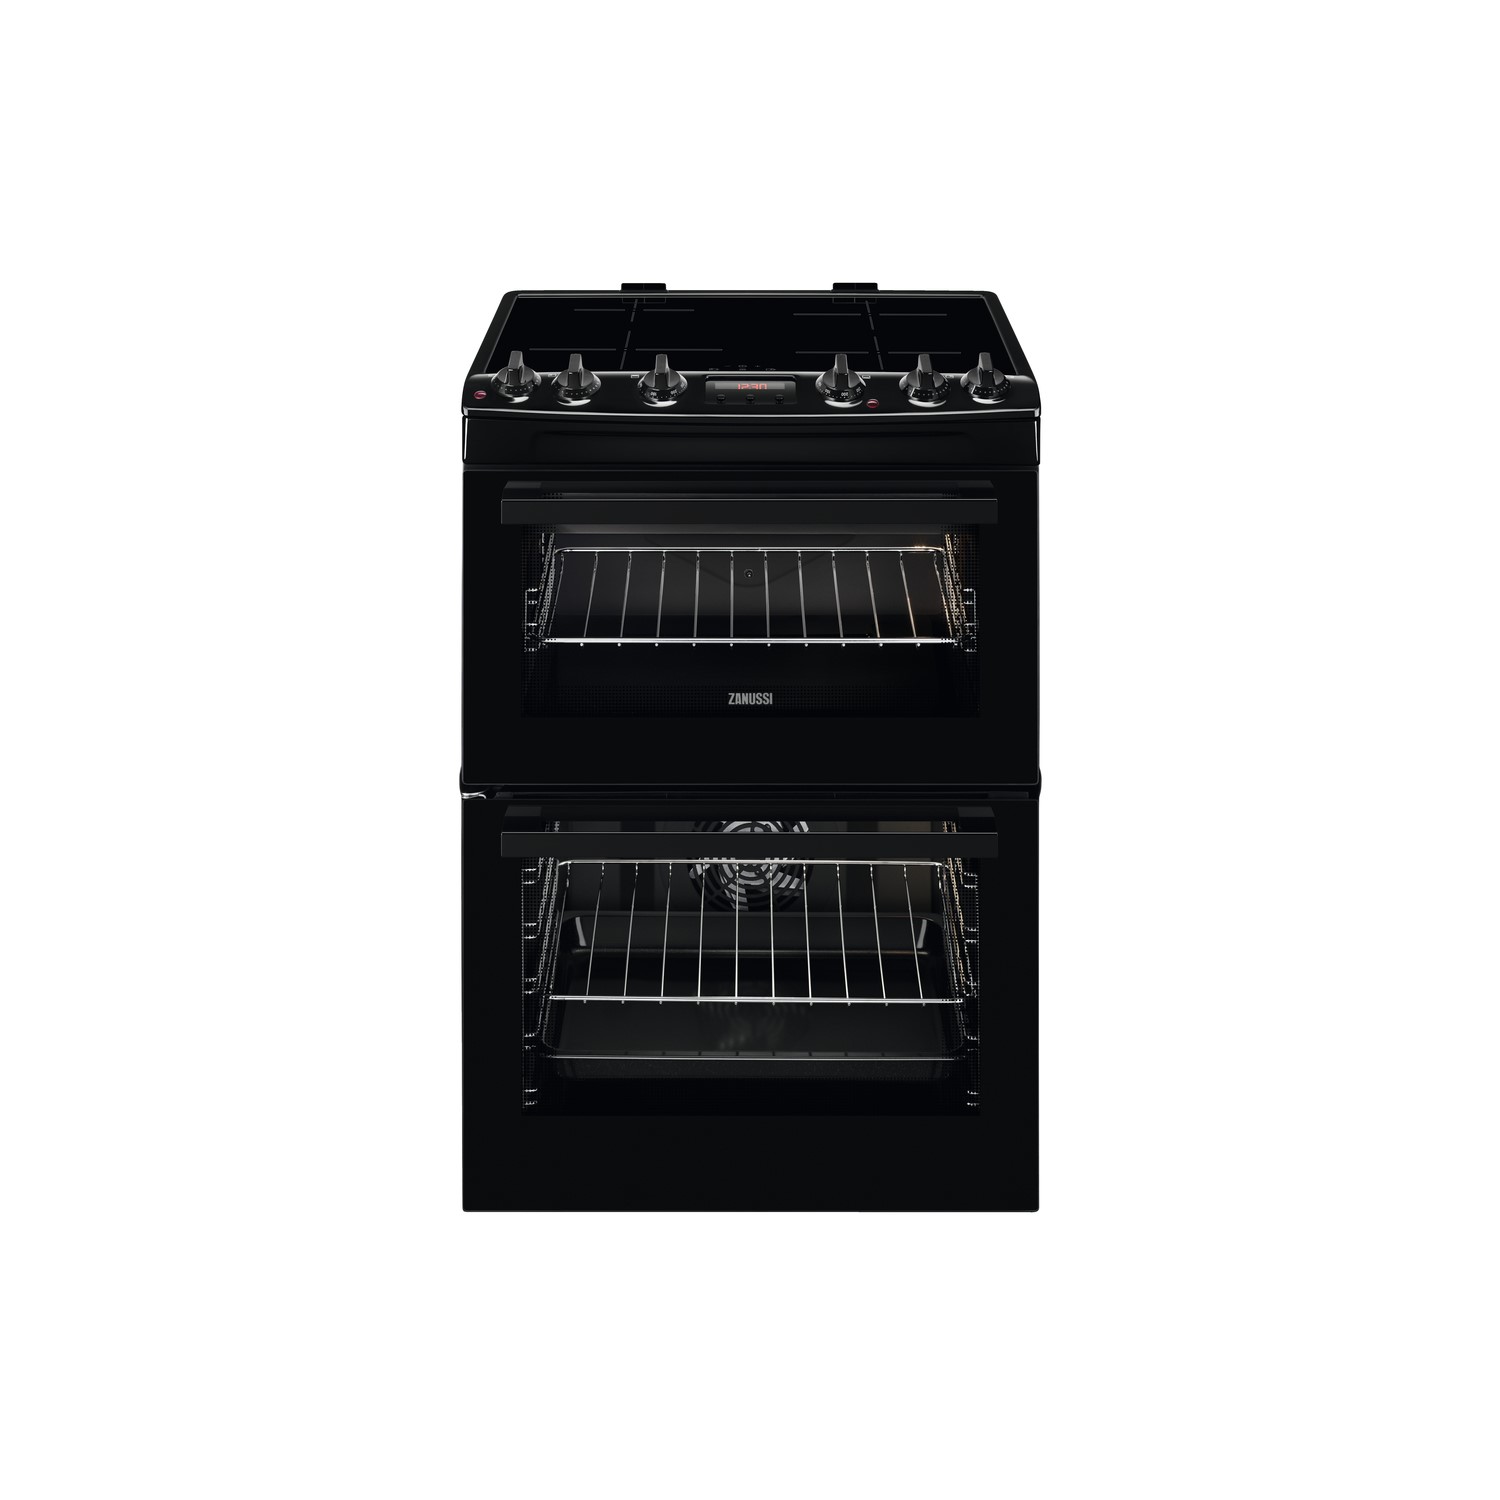 Zanussi 60cm Double Oven Induction Electric Cooker with Catalytic Liners - Black